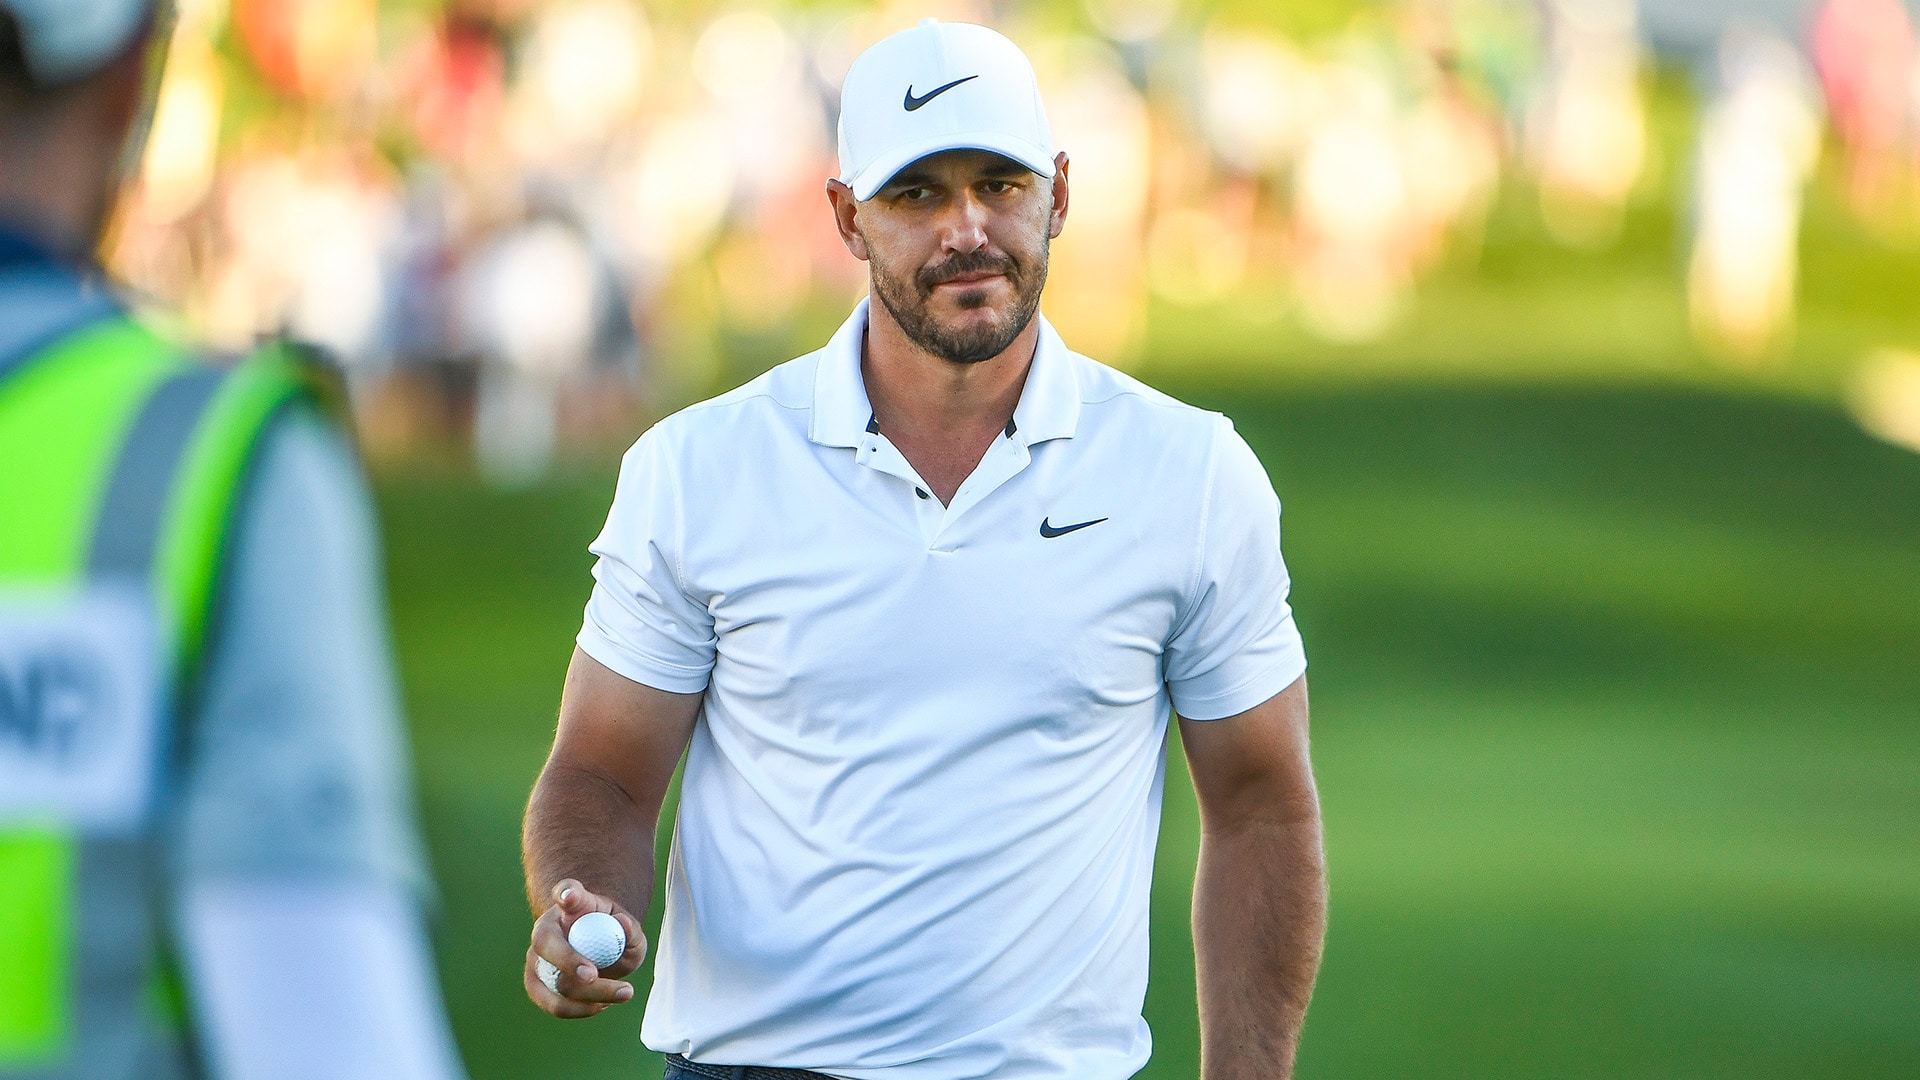 What's on Brooks Koepka's mind as he enters weekend at WMPO two back? 2